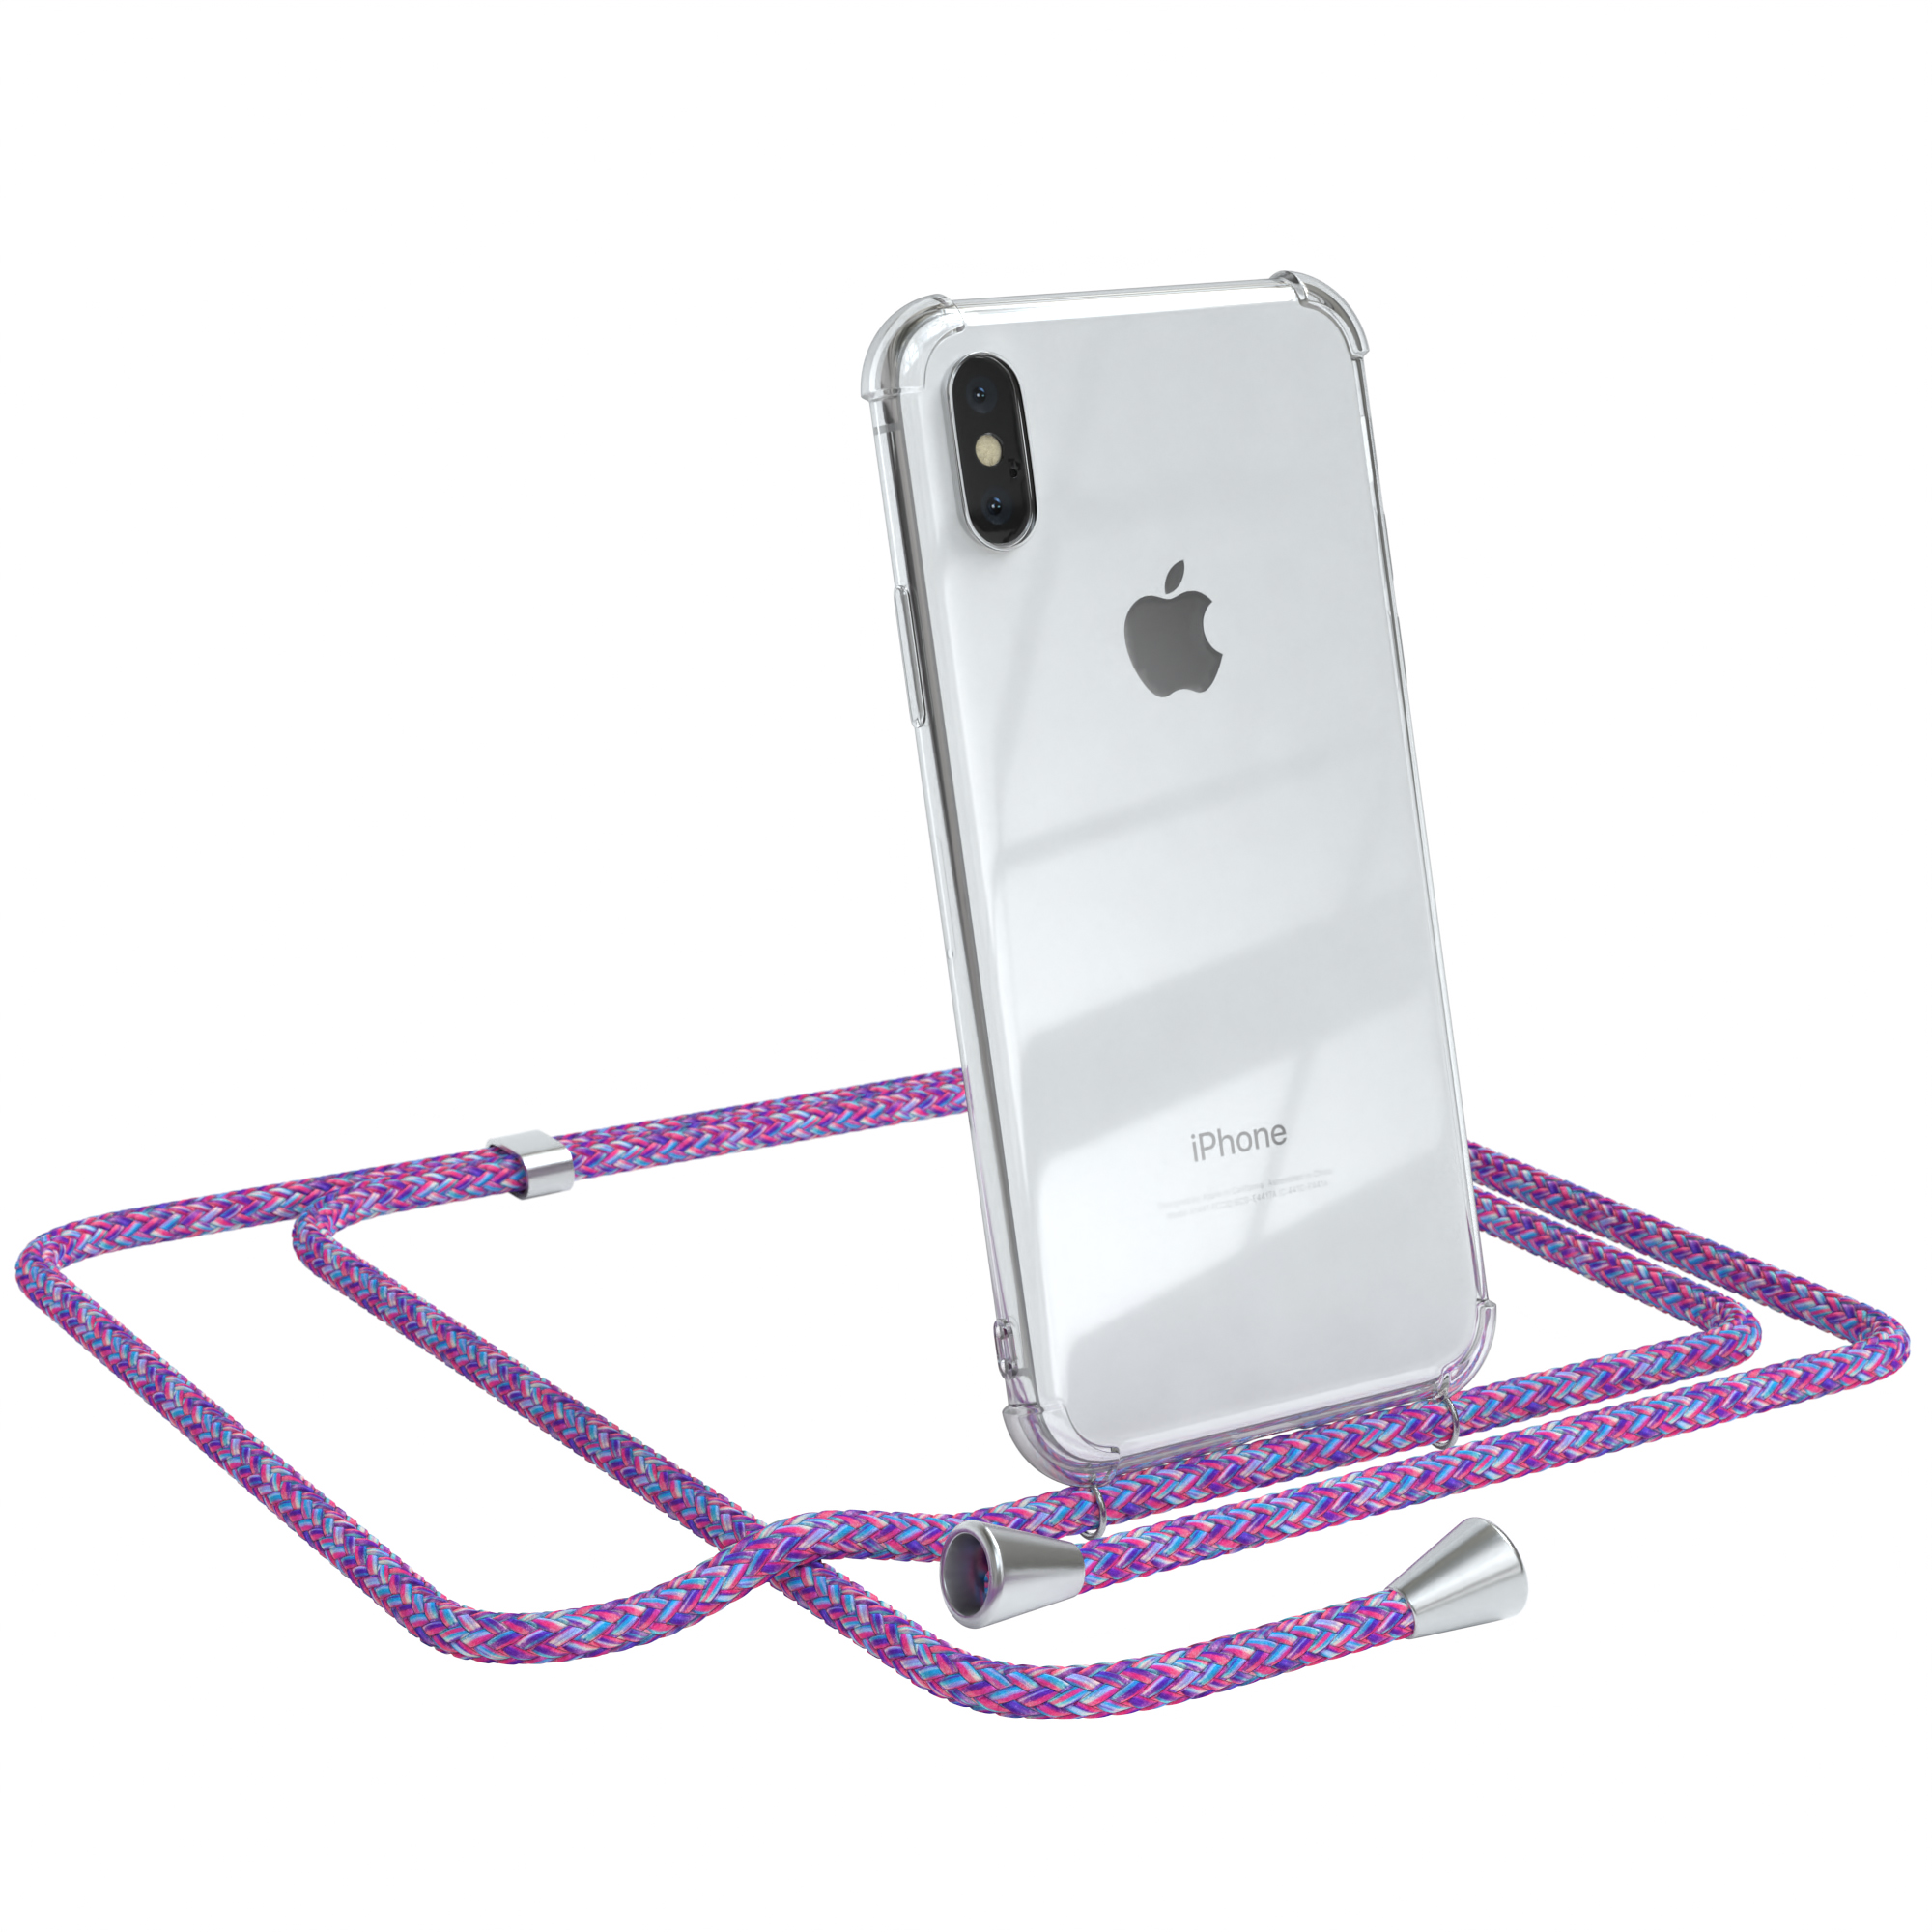 Cover CASE Clips XS Umhängeband, Umhängetasche, Apple, Lila Silber EAZY Clear mit Max, / iPhone